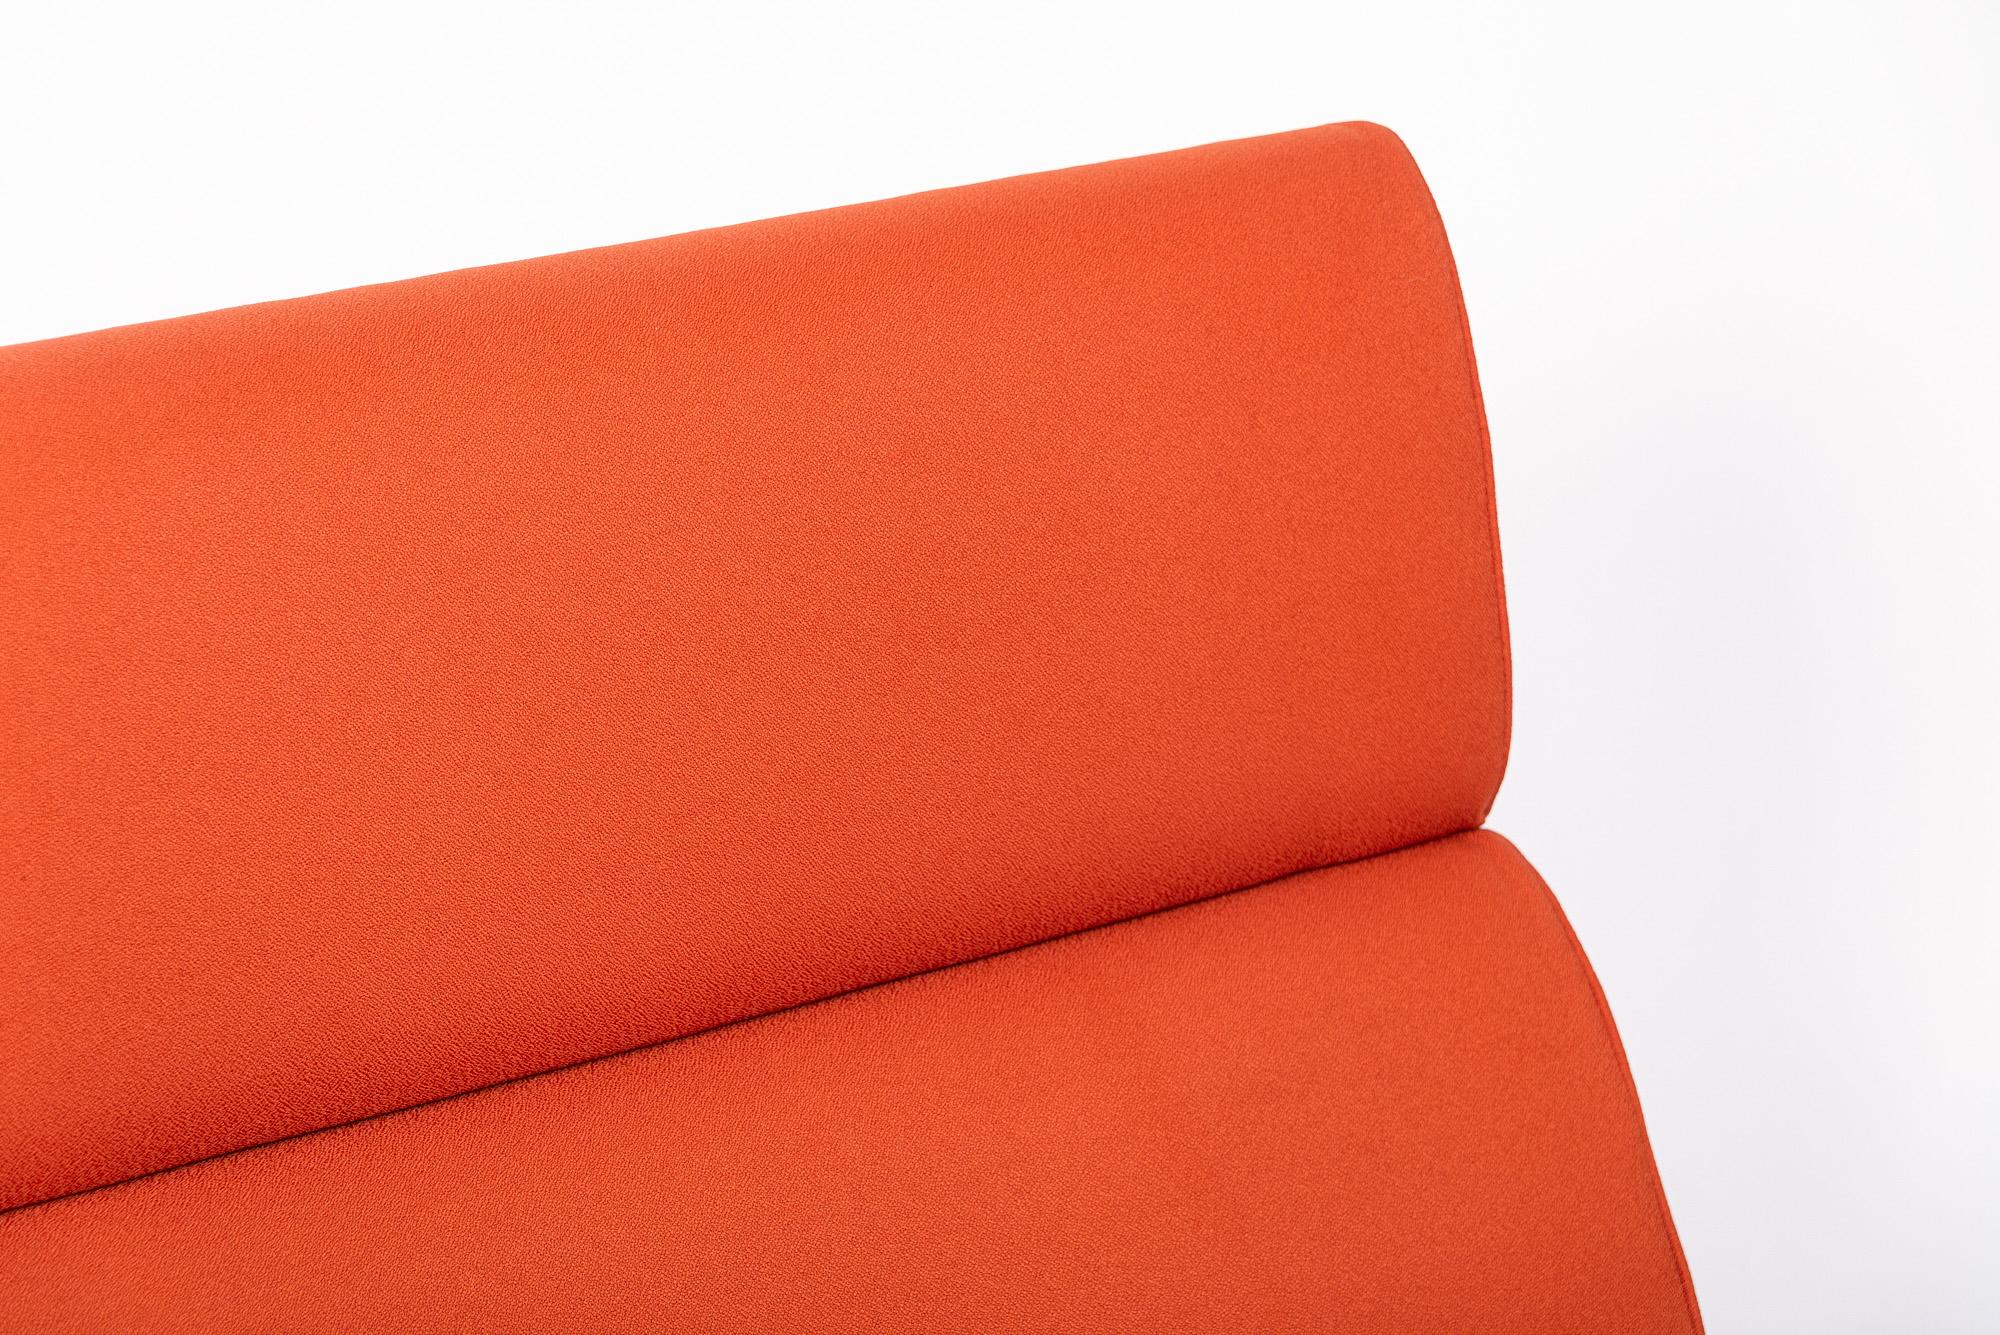 1970s Midcentury Orange Sofa Compact by Charles & Ray Eames for Herman Miller 2